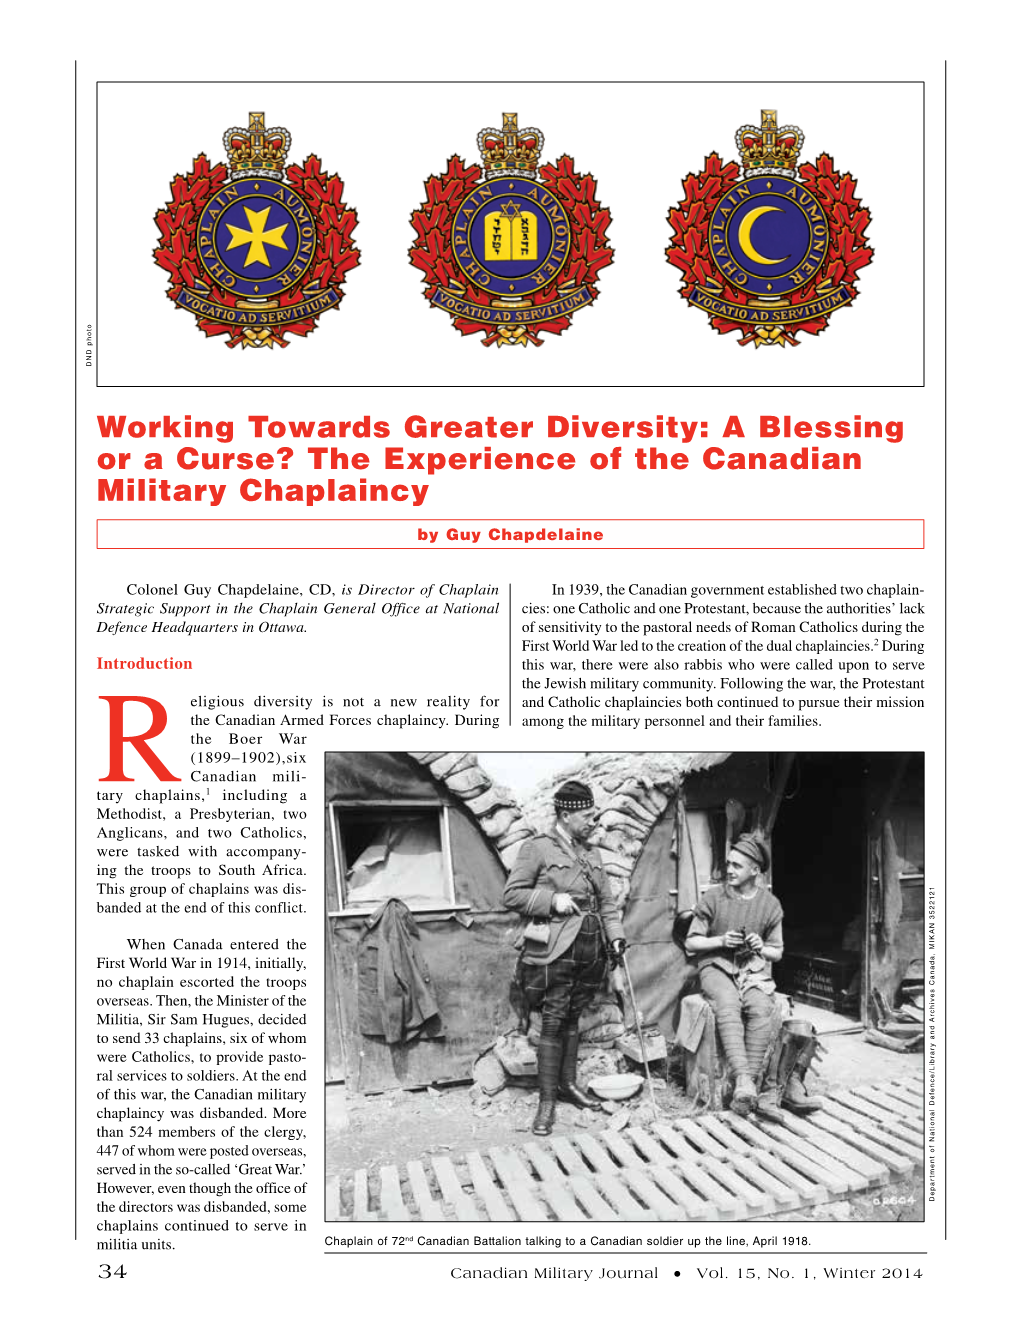 The Experience of the Canadian Military Chaplaincy